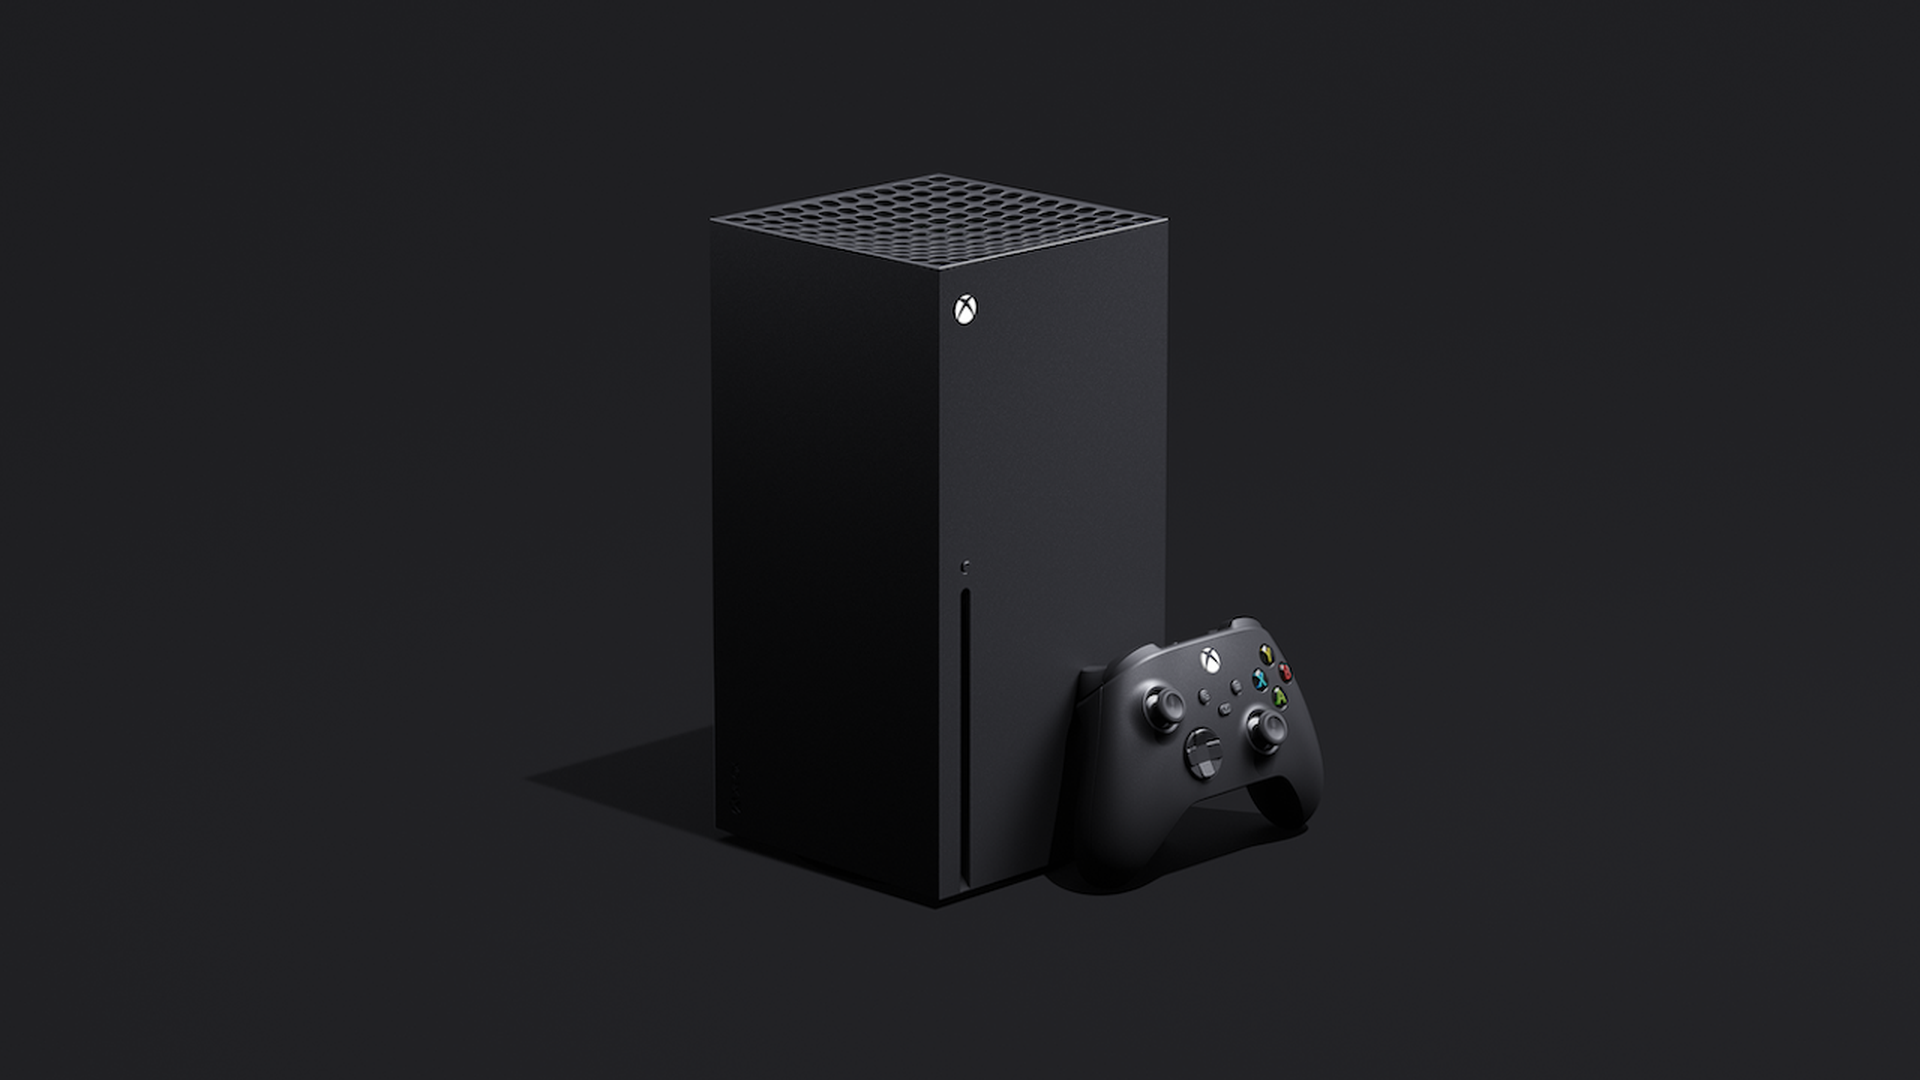 Image of a black Xbox console and controller in front of a black backdrop